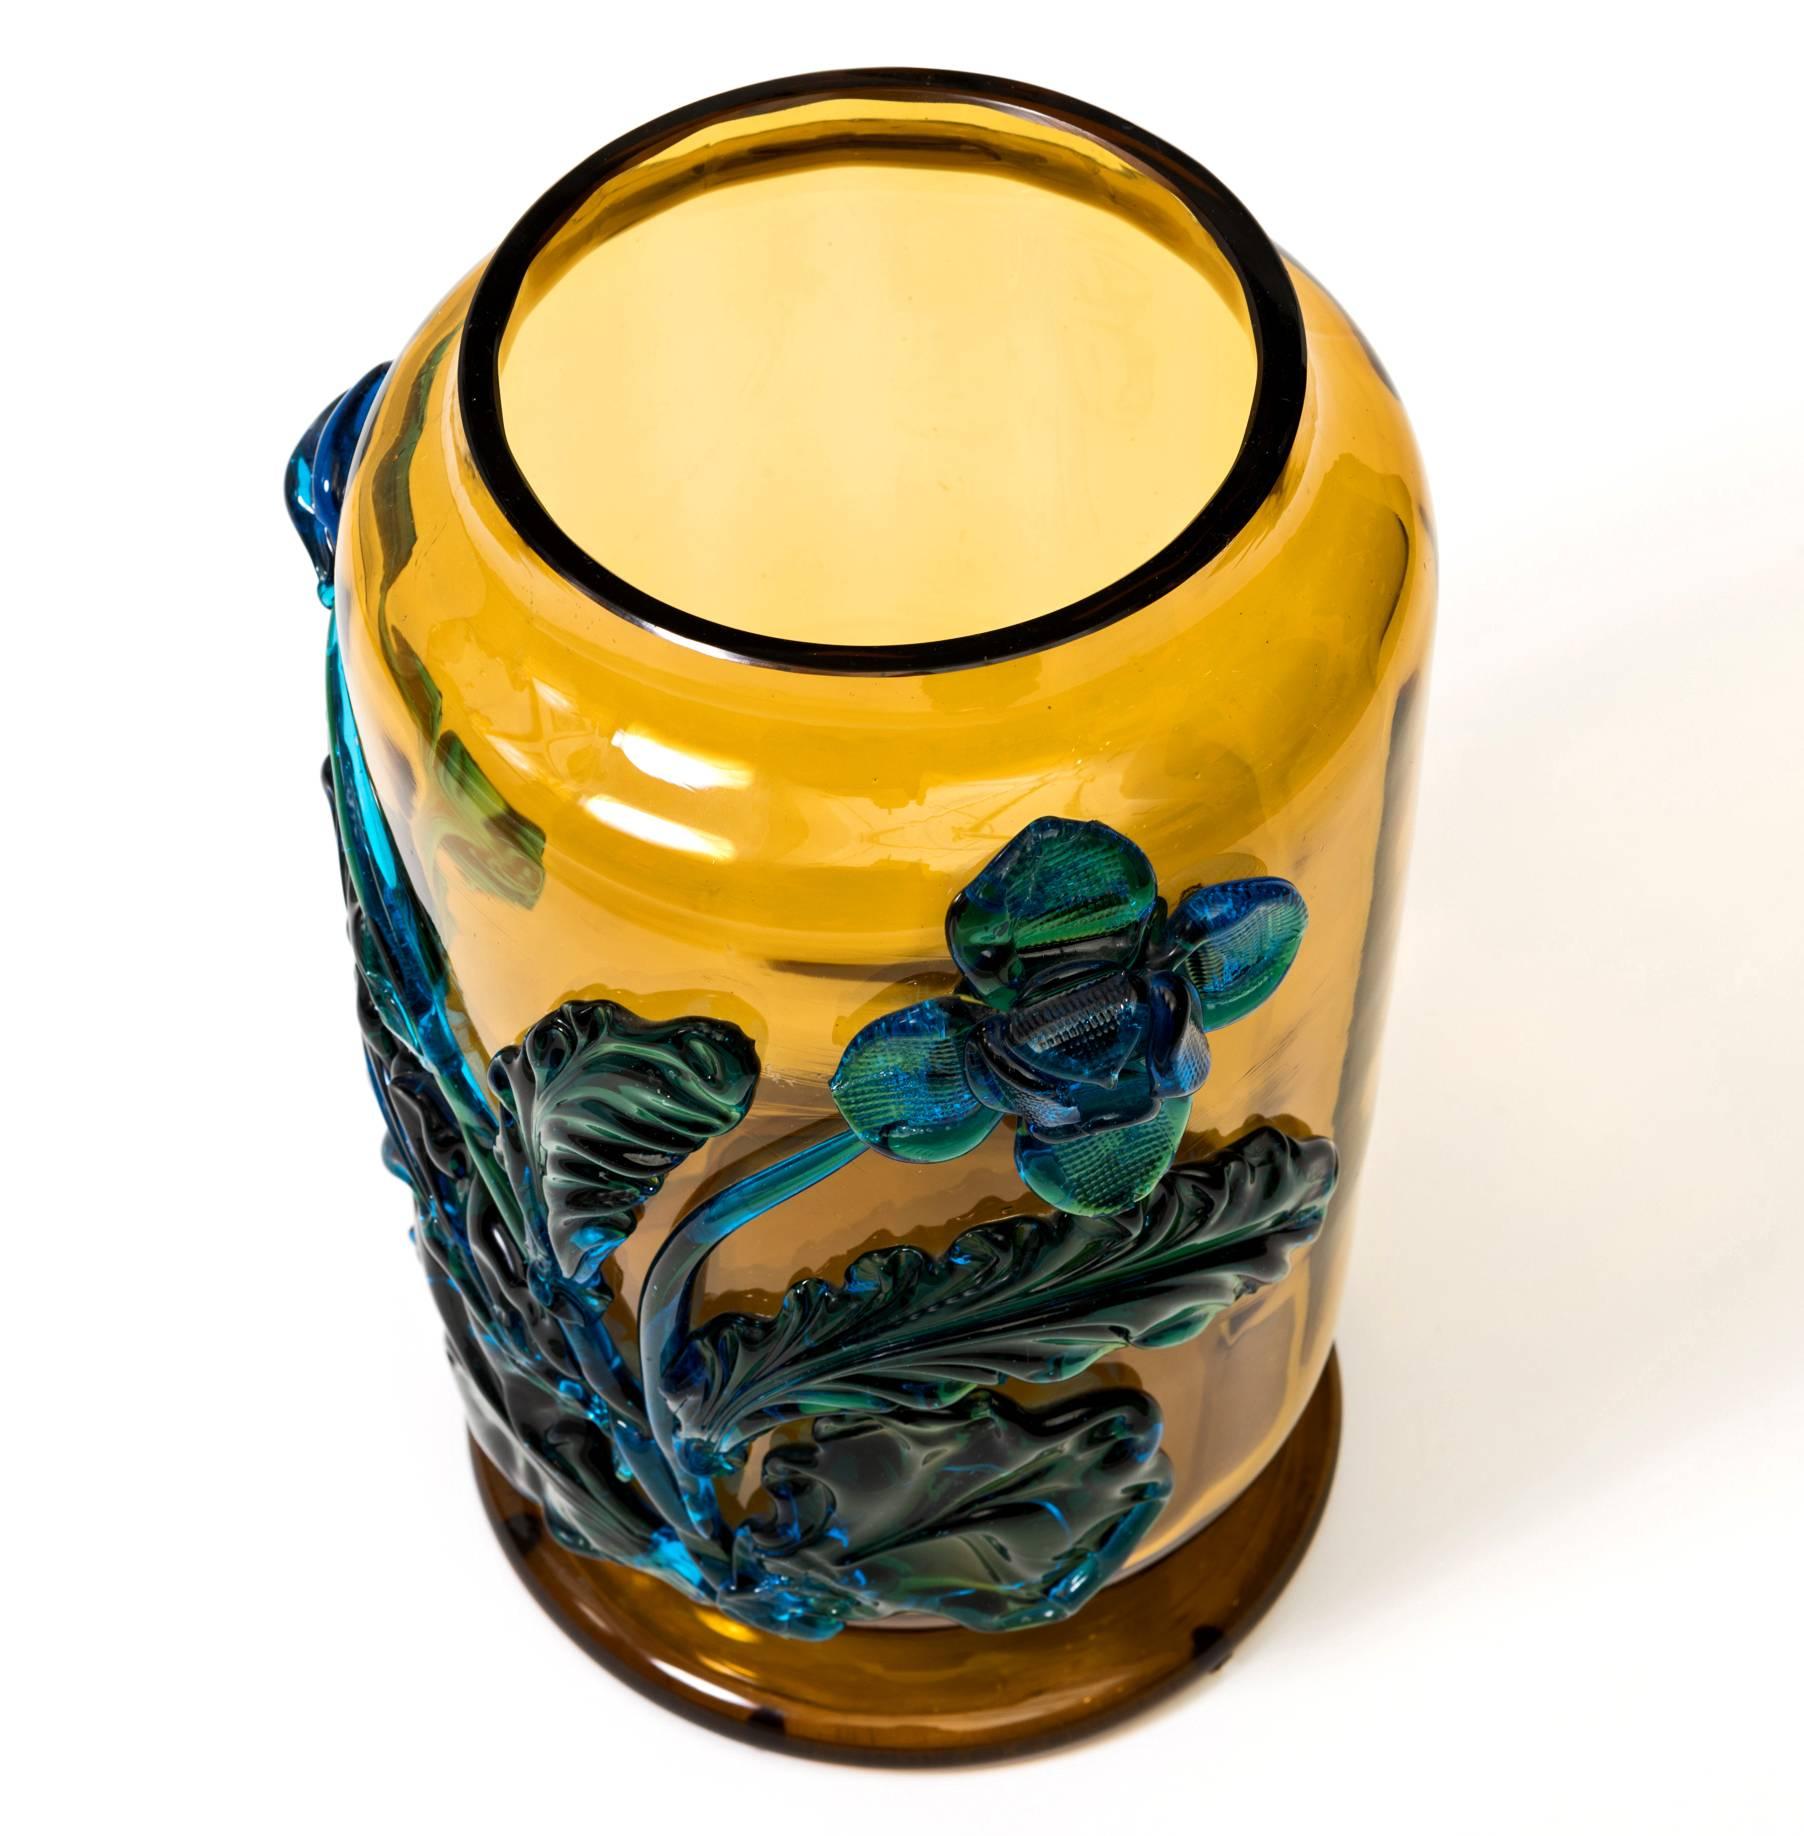 Stunning Art Nouveau art glass vase with applied flowers by Moser. Bold Amber gold with turquoise flowers create this one of a kind piece. Signed.